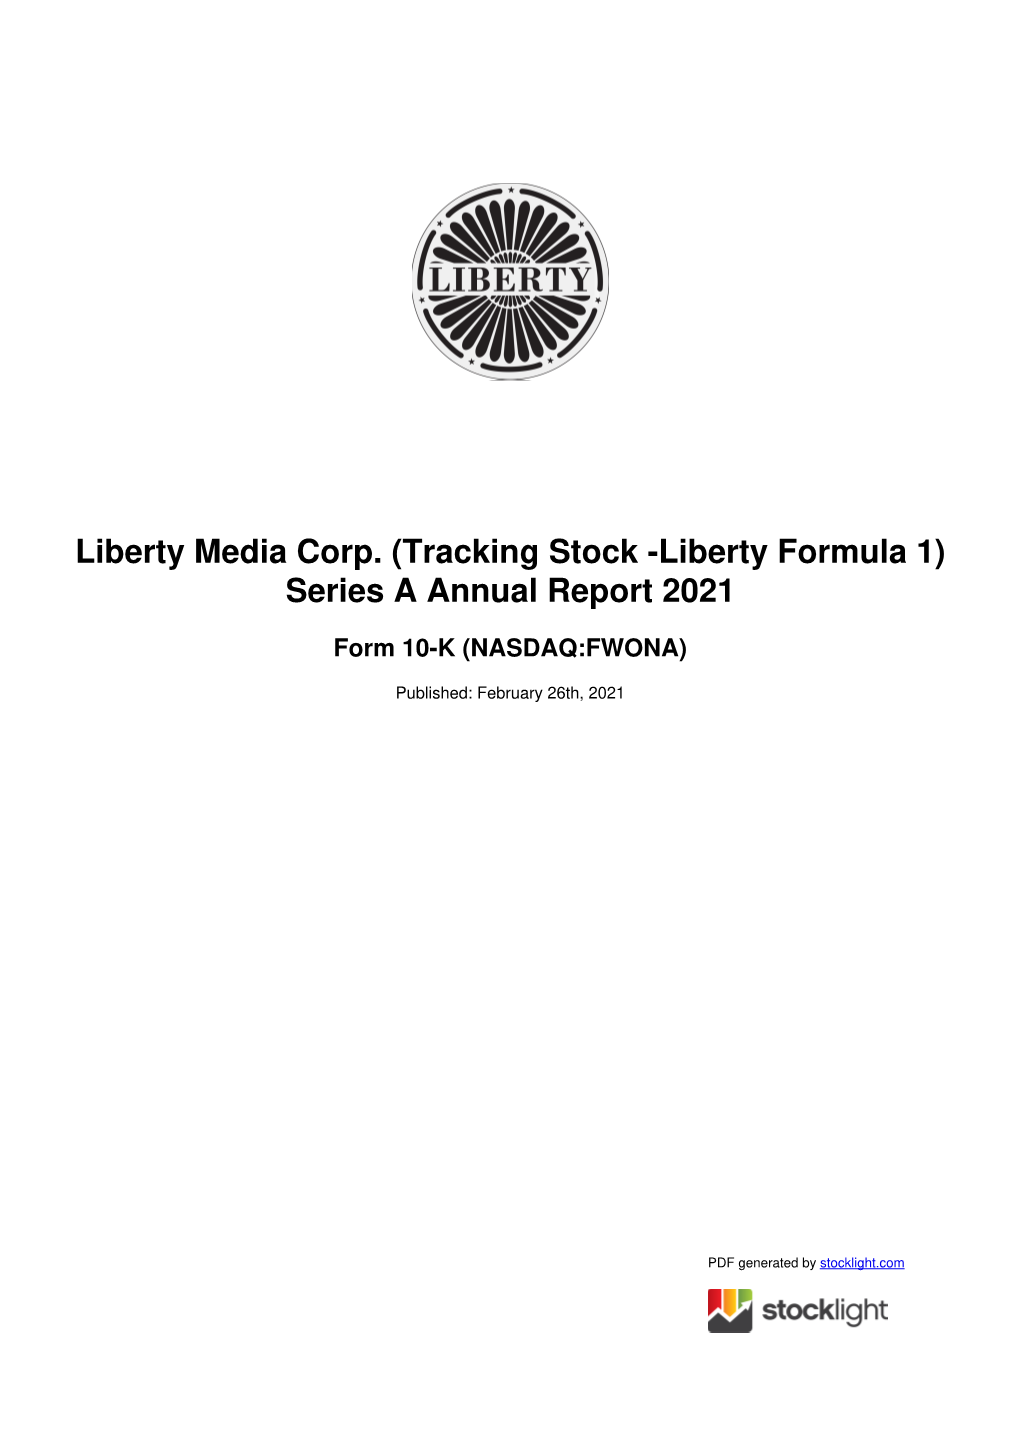 Tracking Stock -Liberty Formula 1) Series a Annual Report 2021